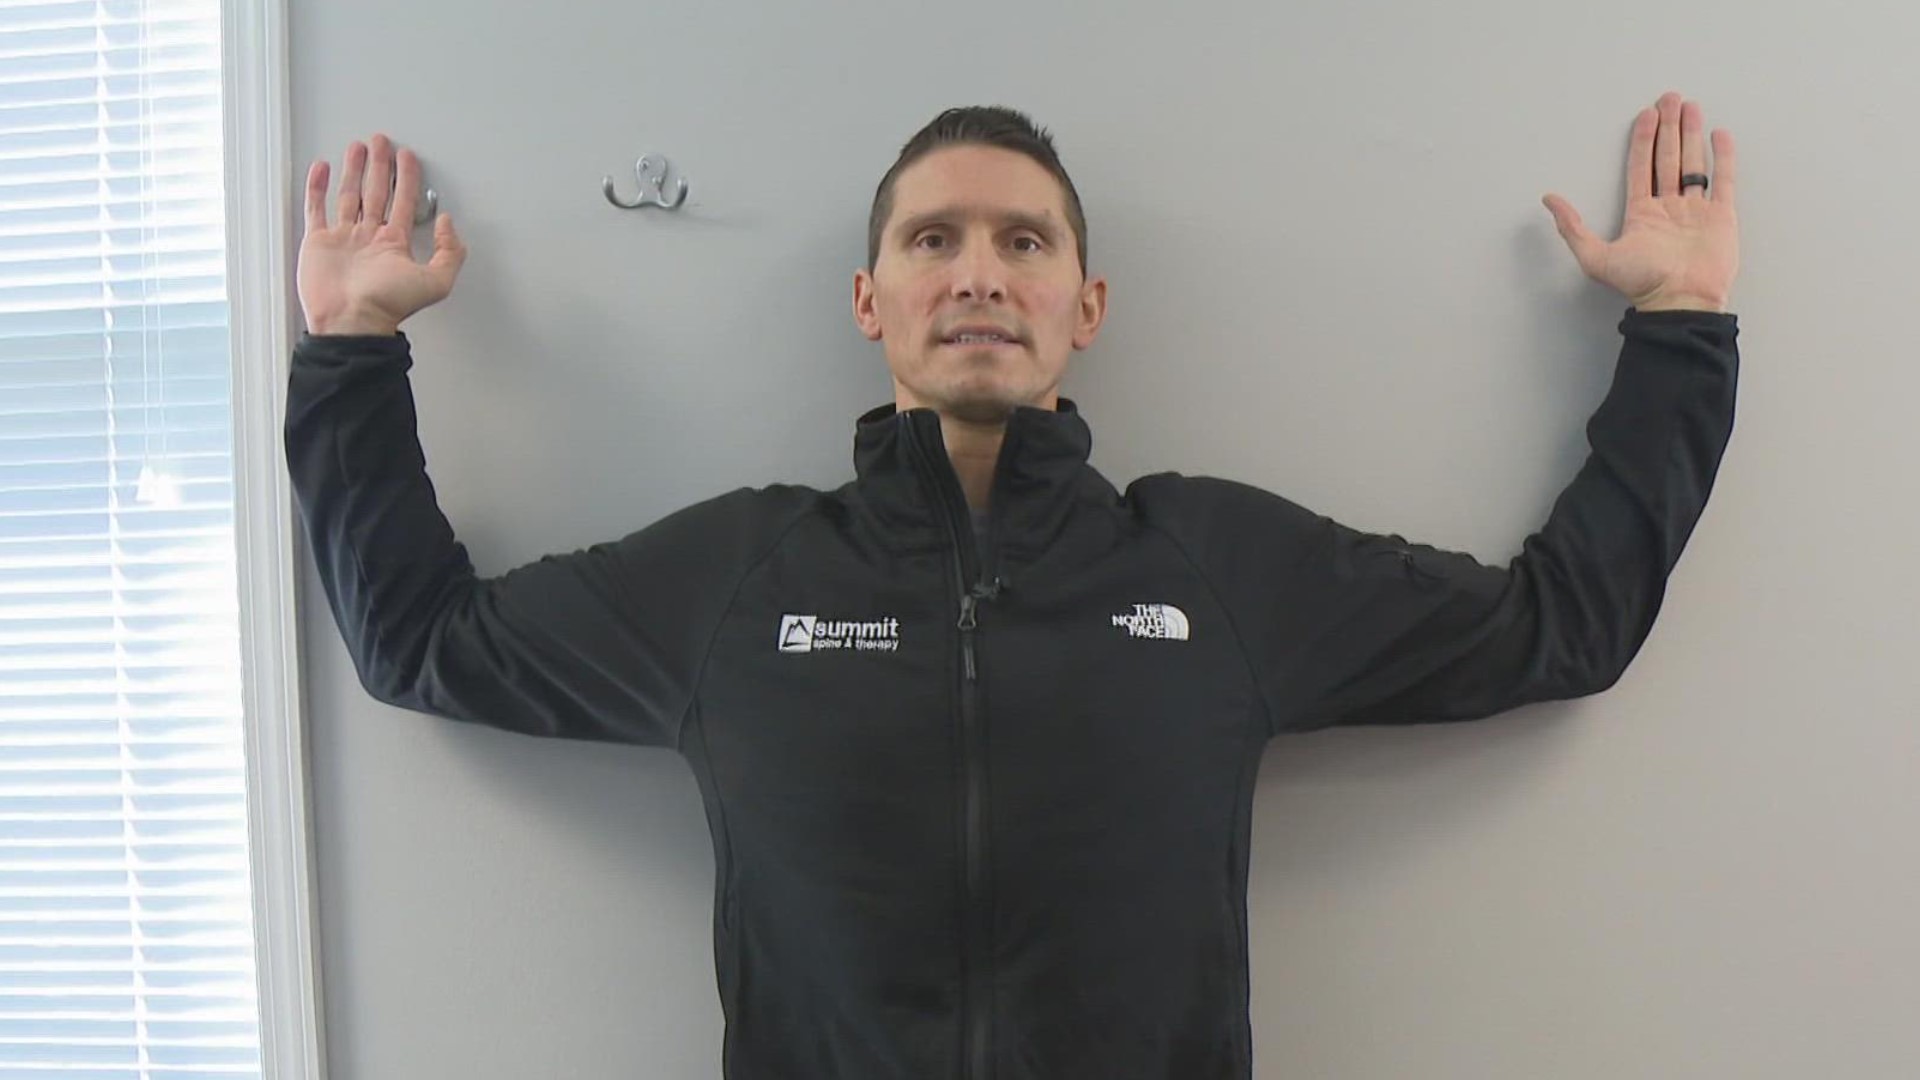 Dr. Clark Scott demonstrates a simple exercise that can help reduce neck pain.